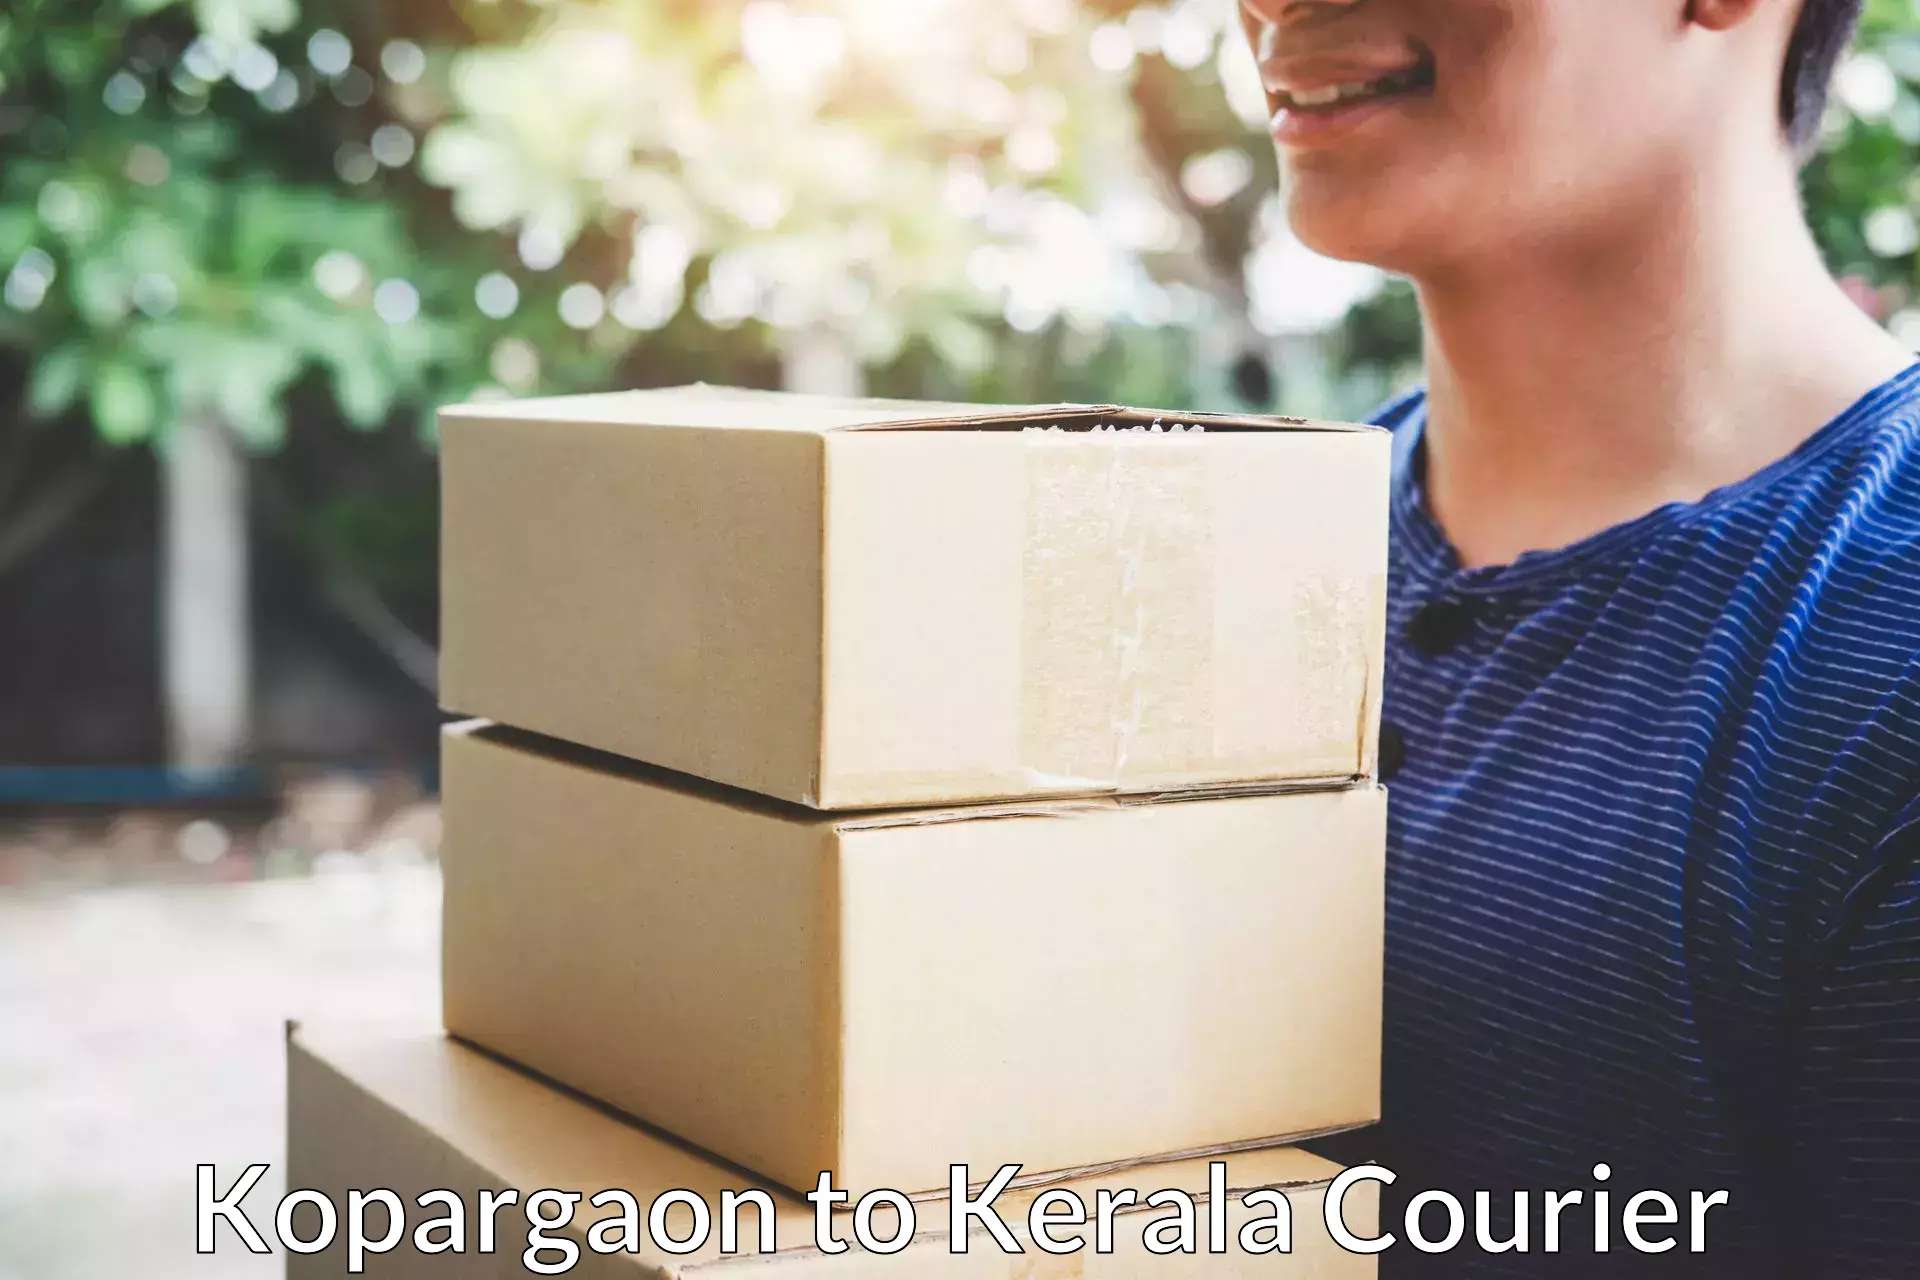 Home moving specialists Kopargaon to Kerala